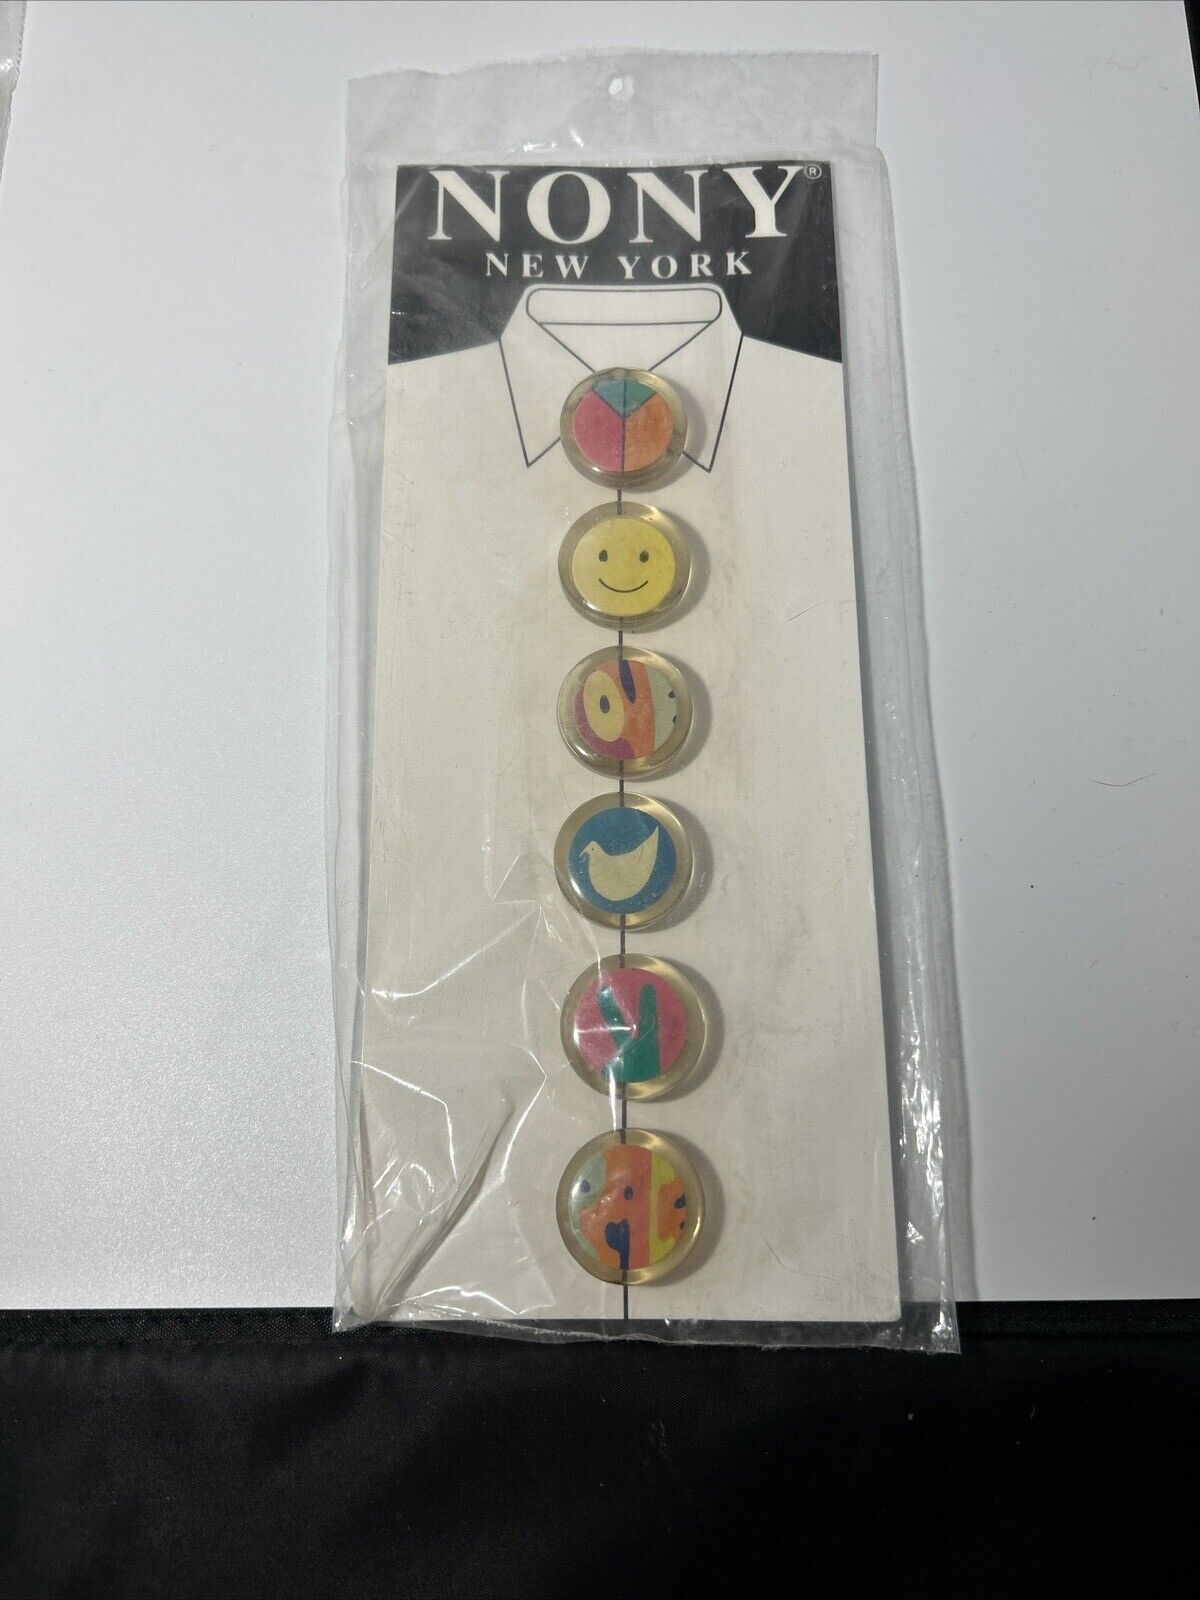 Vintage NONY New York Button Covers Set-6 Multi Colored Covers